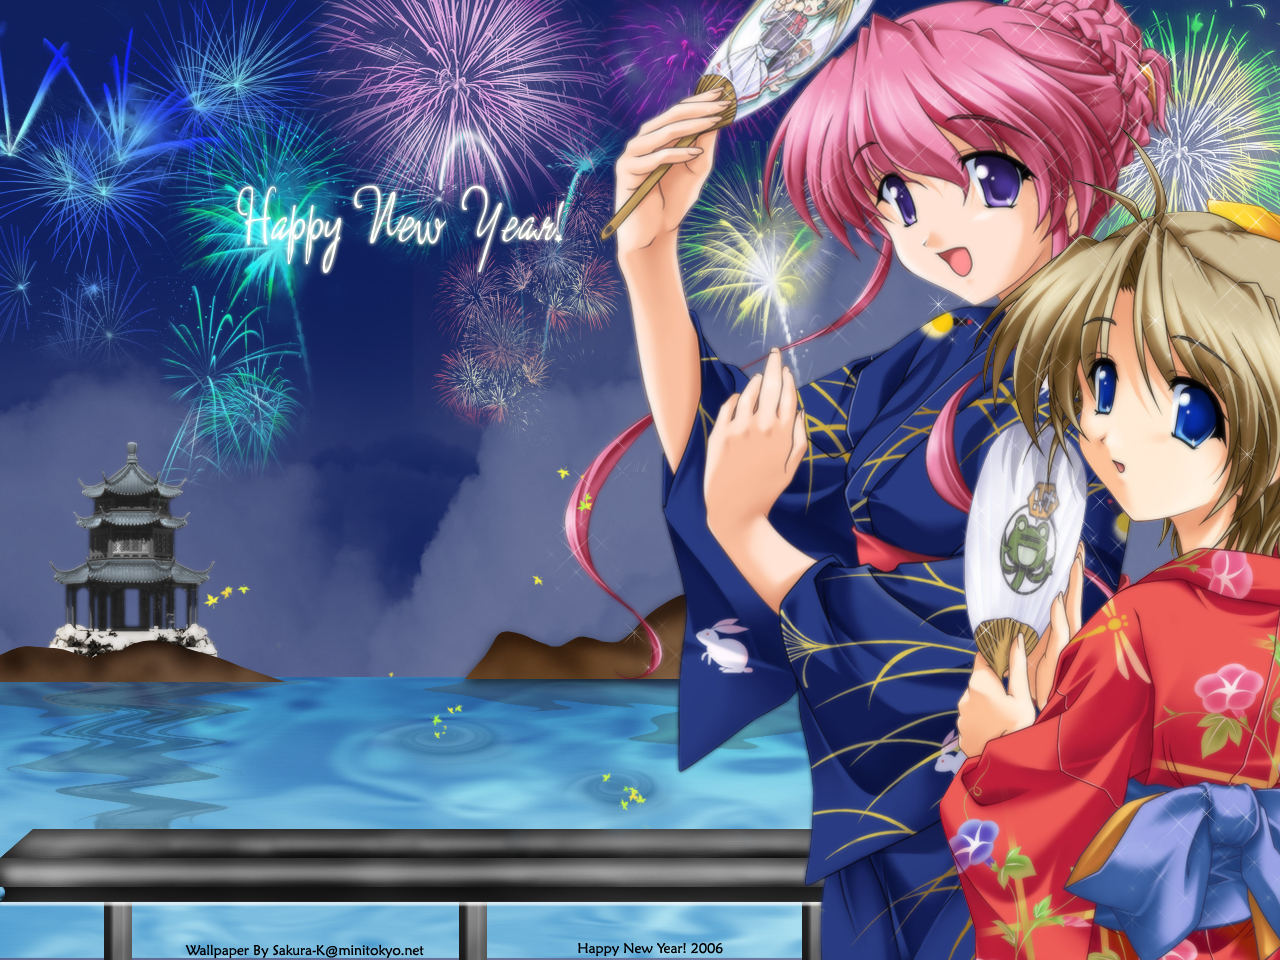 New Year's Episodes In Anime - by AnnaSartin | Anime-Planet